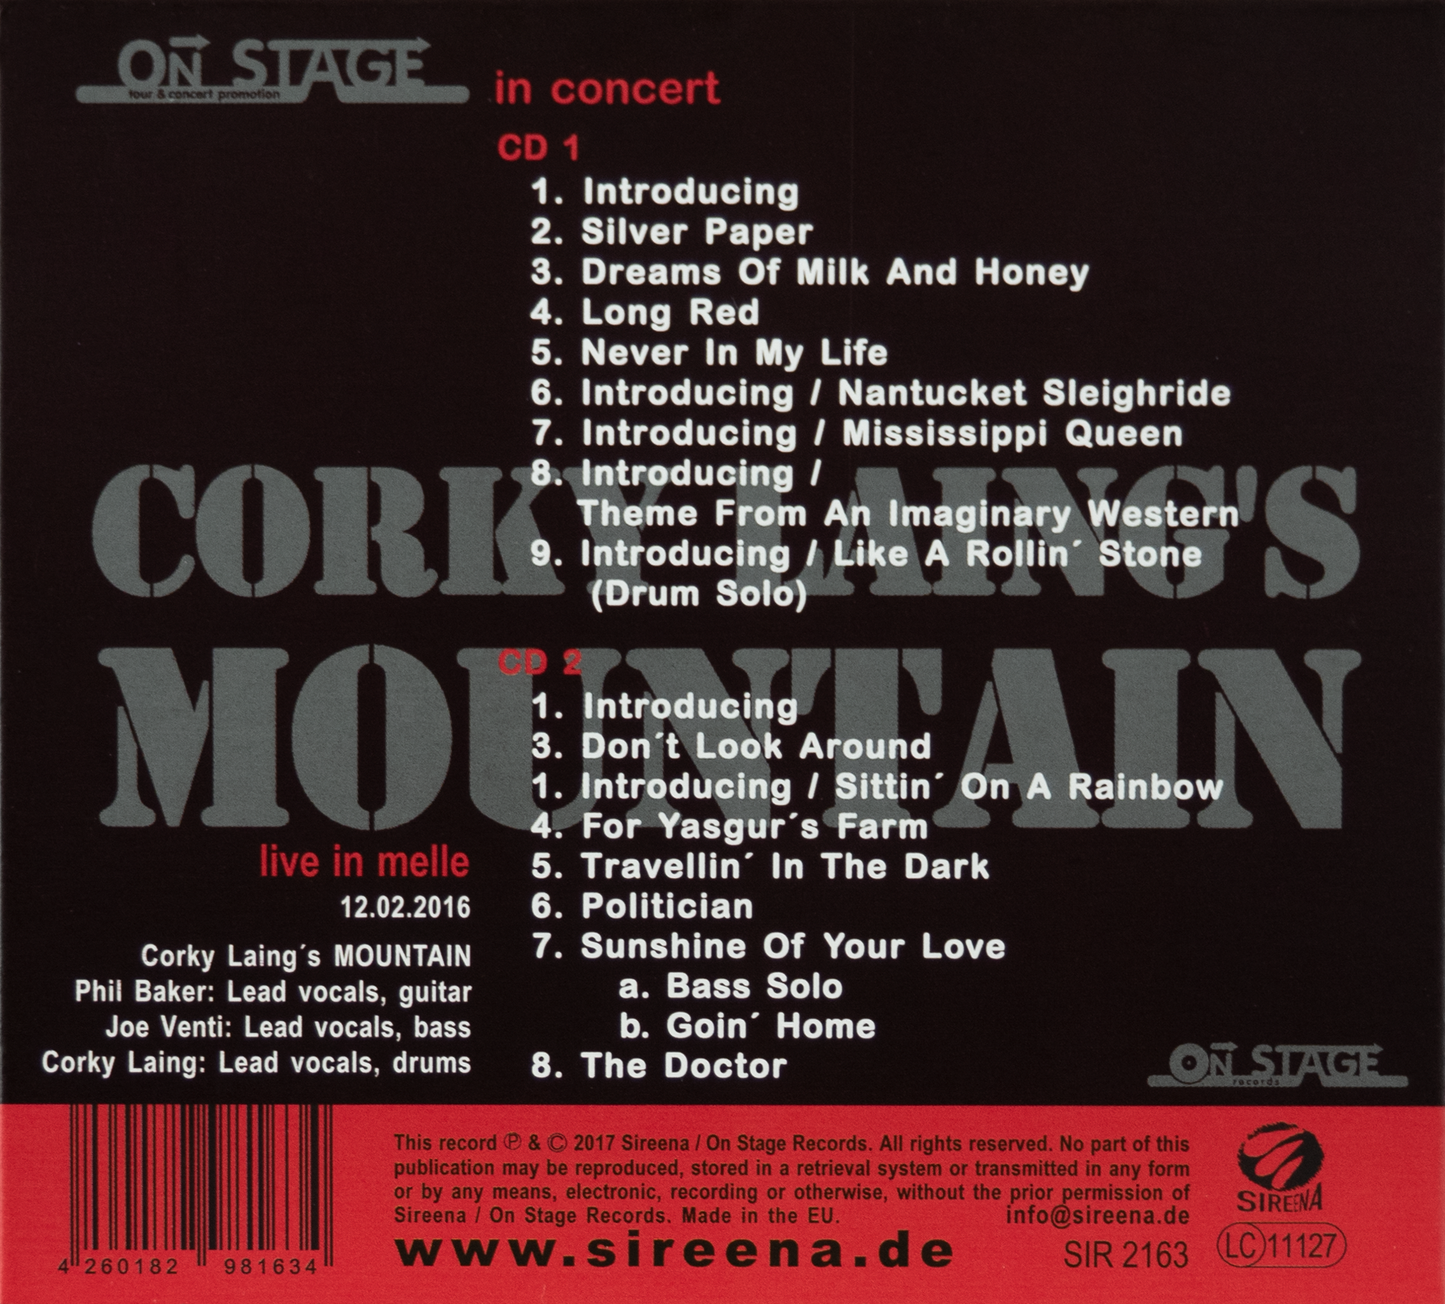 Corky Laing's MOUNTAIN - live in Melle, 2CDs -  Bundle: "Letters to Sarah" Buch inklusive